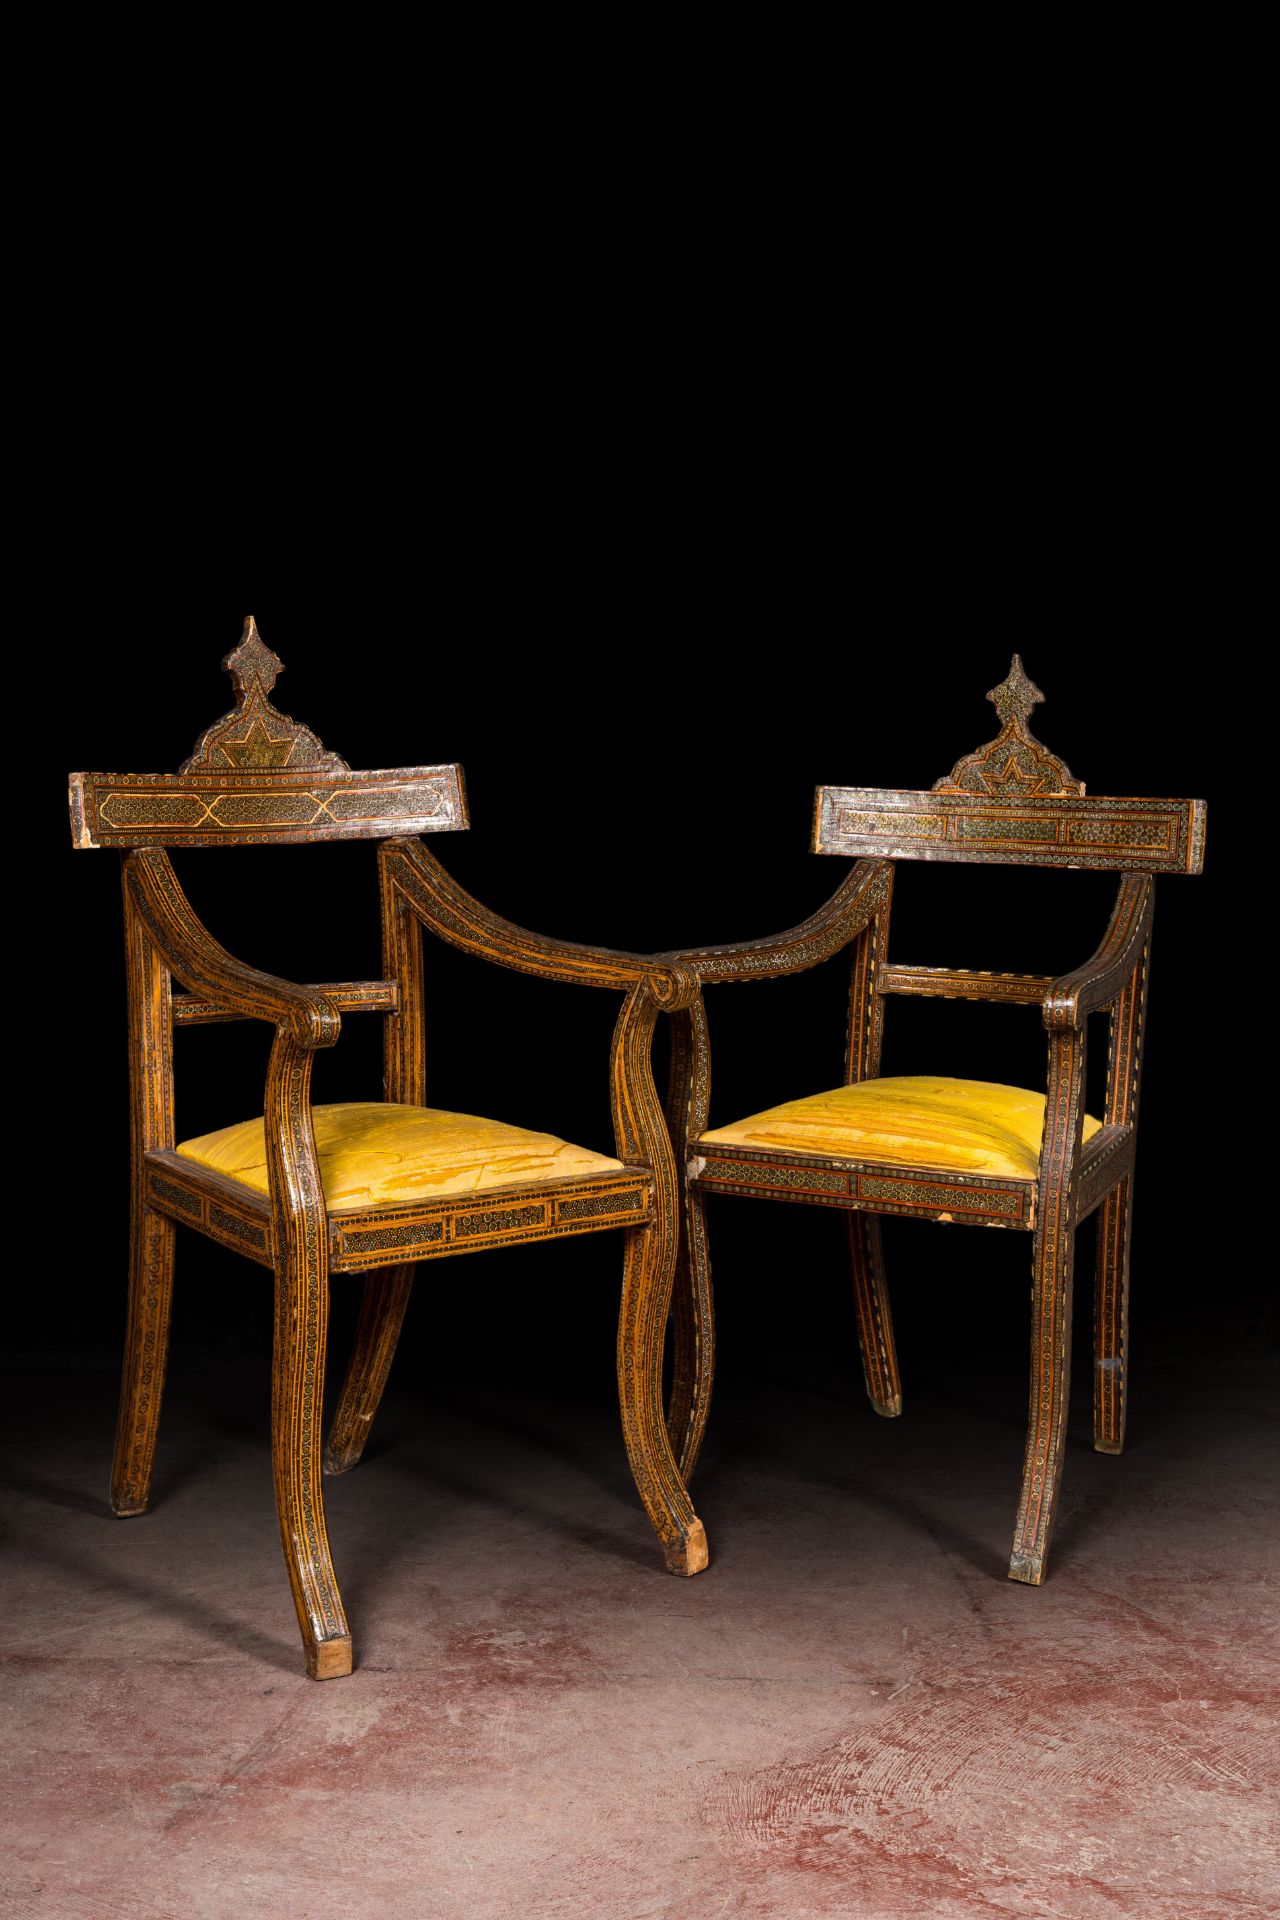 A pair of North African bone-inlaid wooden chairs with silk upholstery, 19th C - Bild 2 aus 4